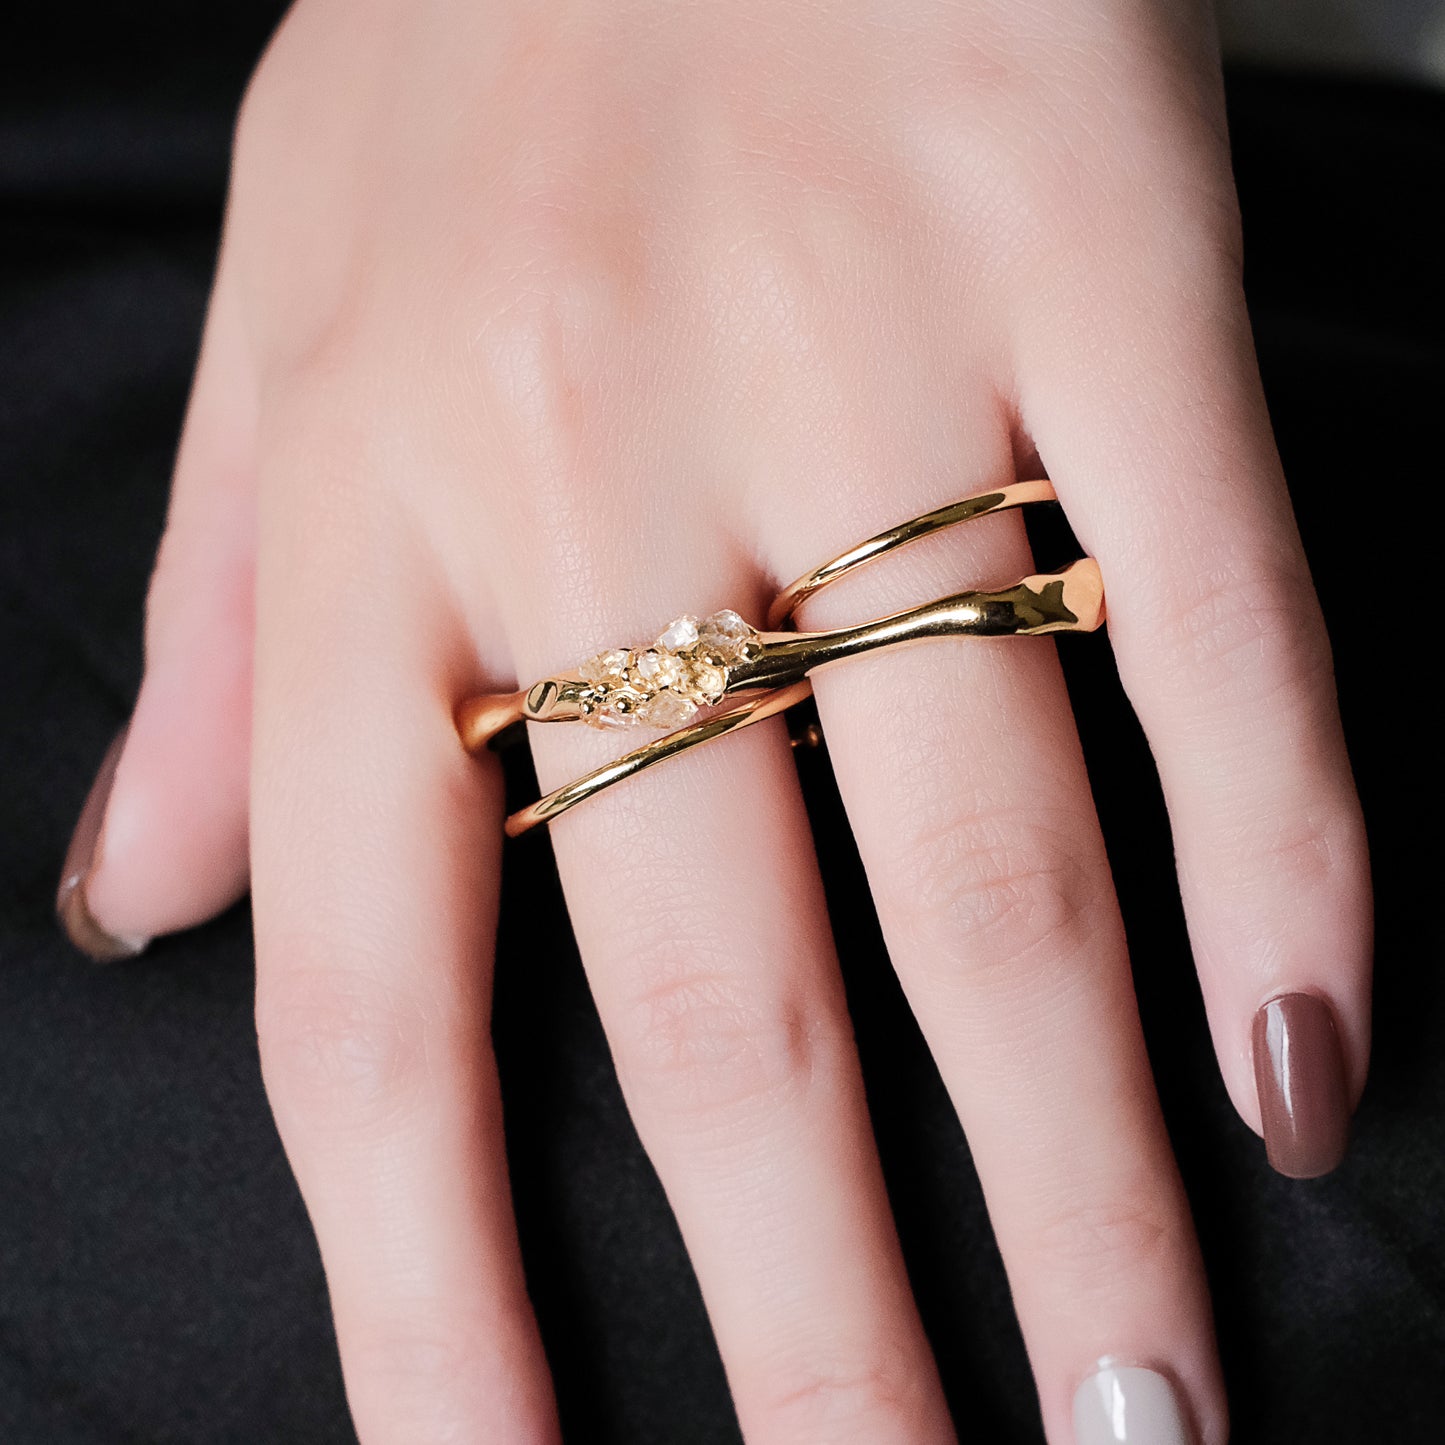 Space Ice - Magenta Mist - Ice Storm Double Finger Ring (18K Gold Plated)